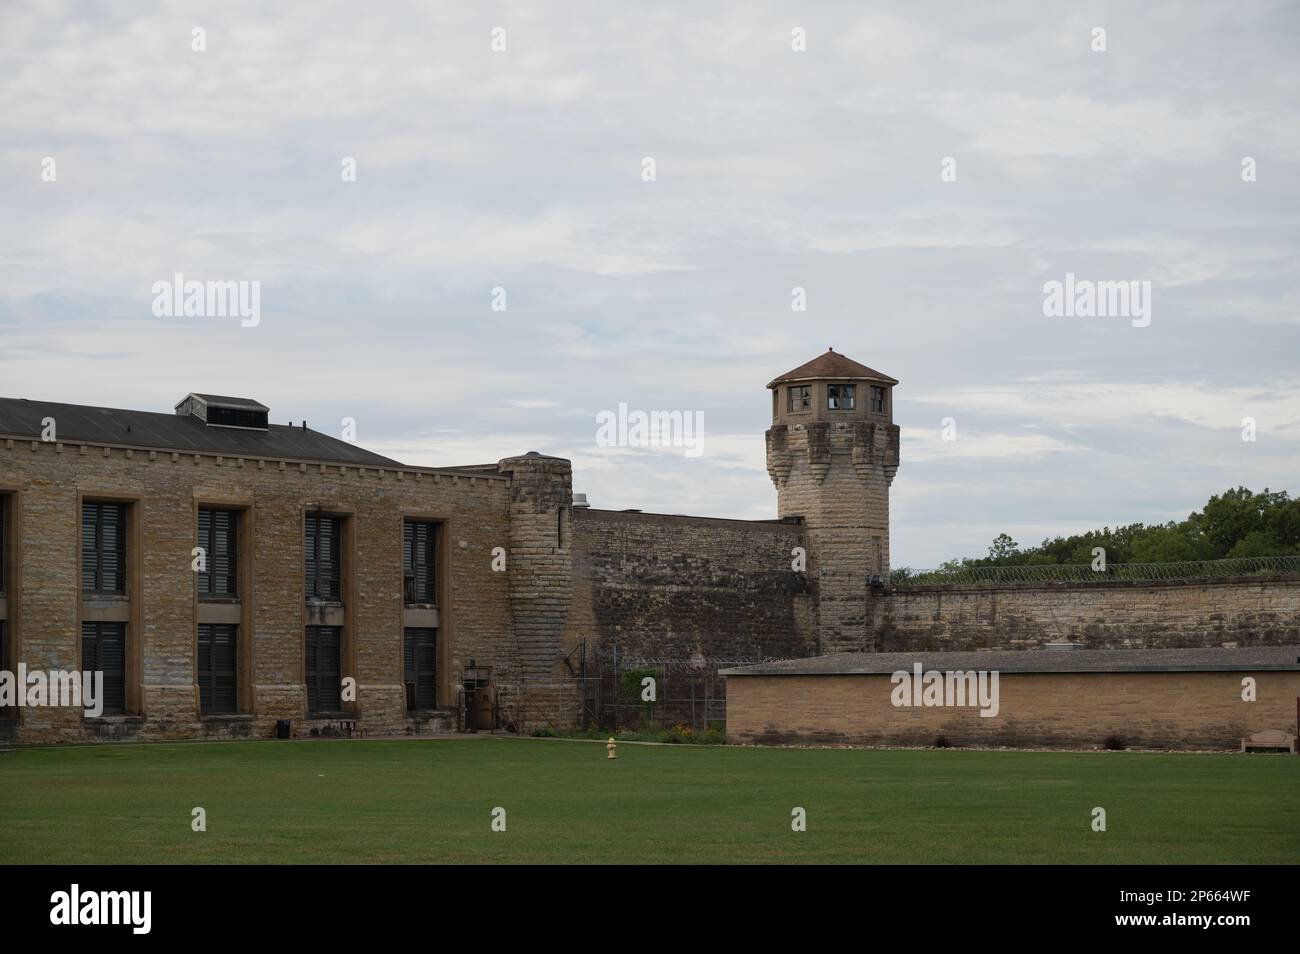 The facade of the historic Joliet Prison against a cloudy sky Stock Photo